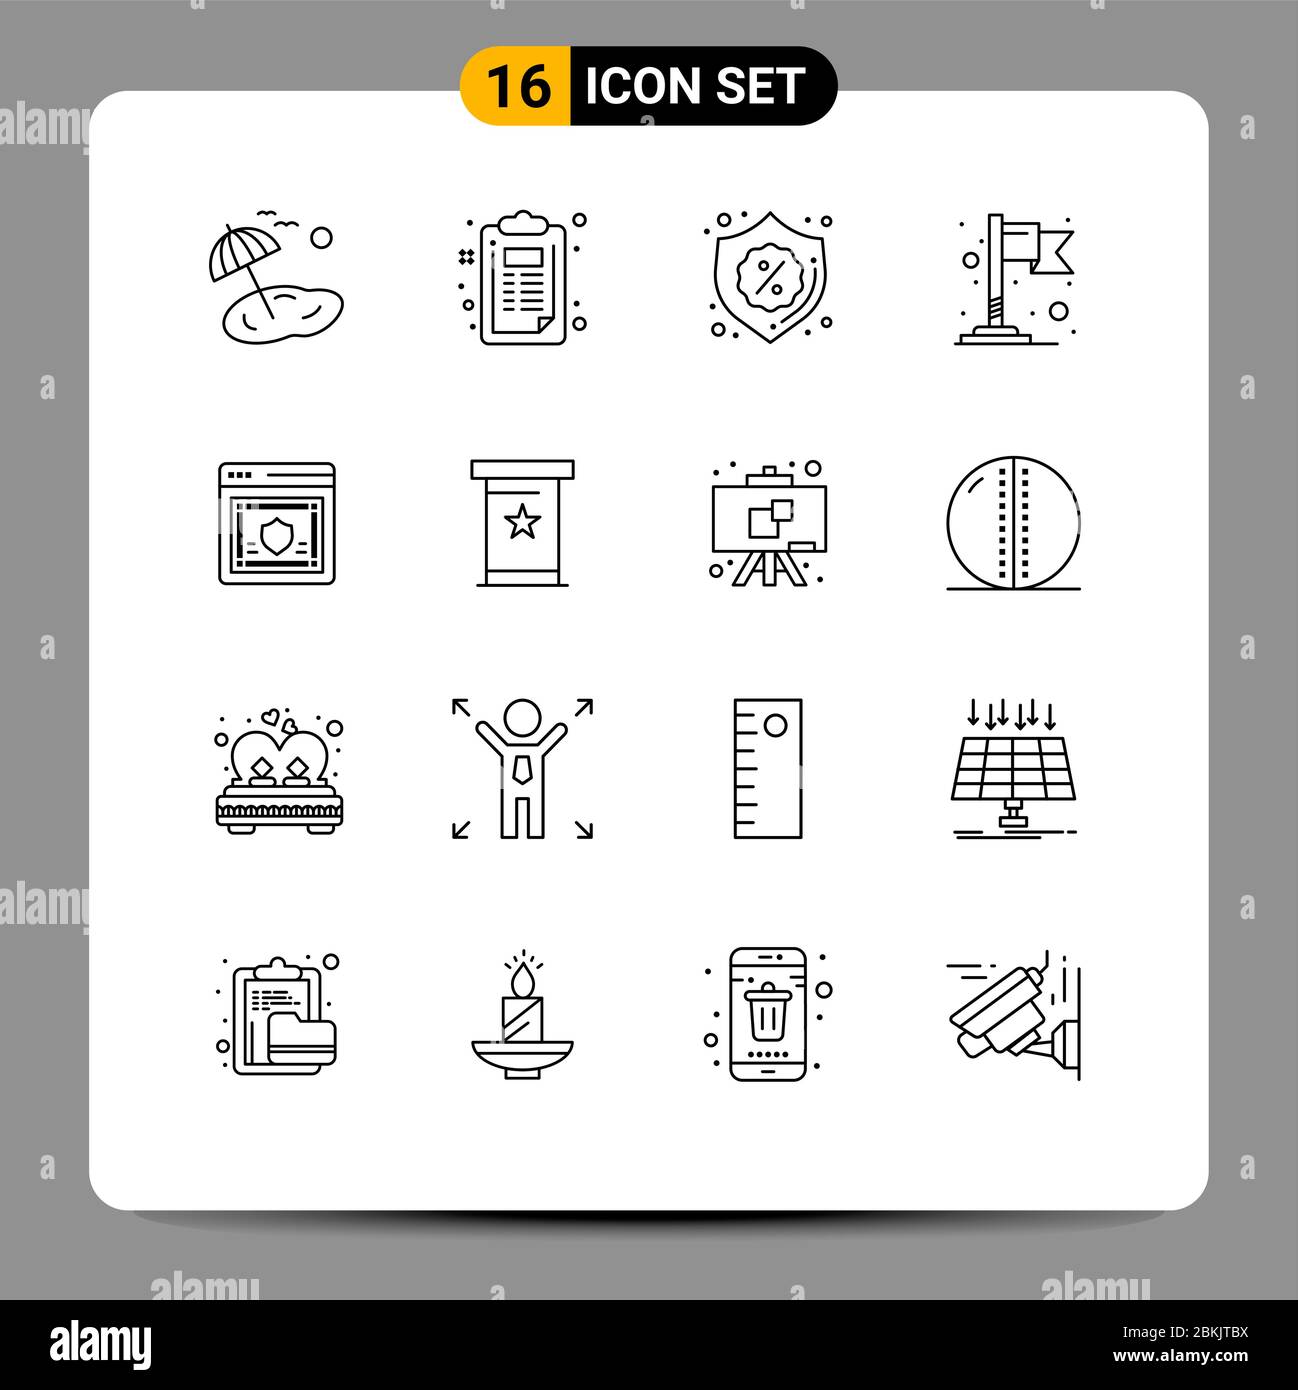 16 Outline concept for Websites Mobile and Apps protection, network, security, map, flag Editable Vector Design Elements Stock Vector